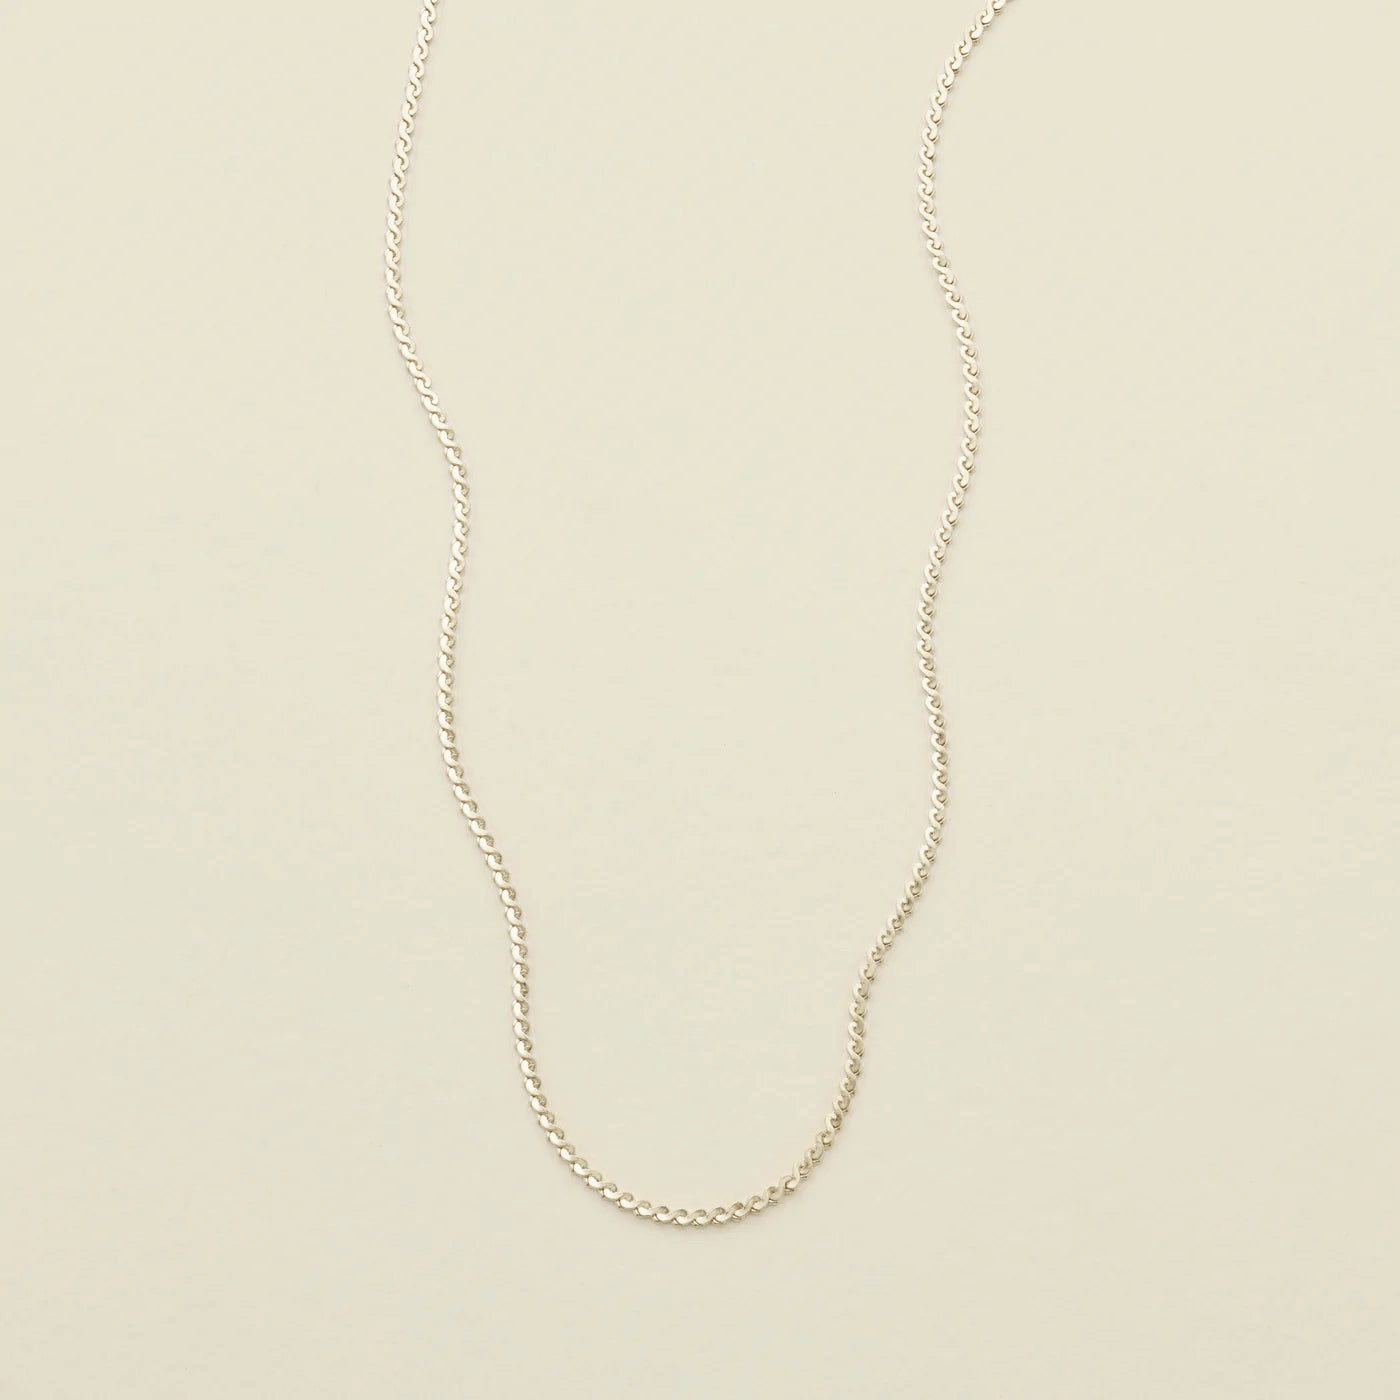 Serpentine Chain Necklace Silver Necklace